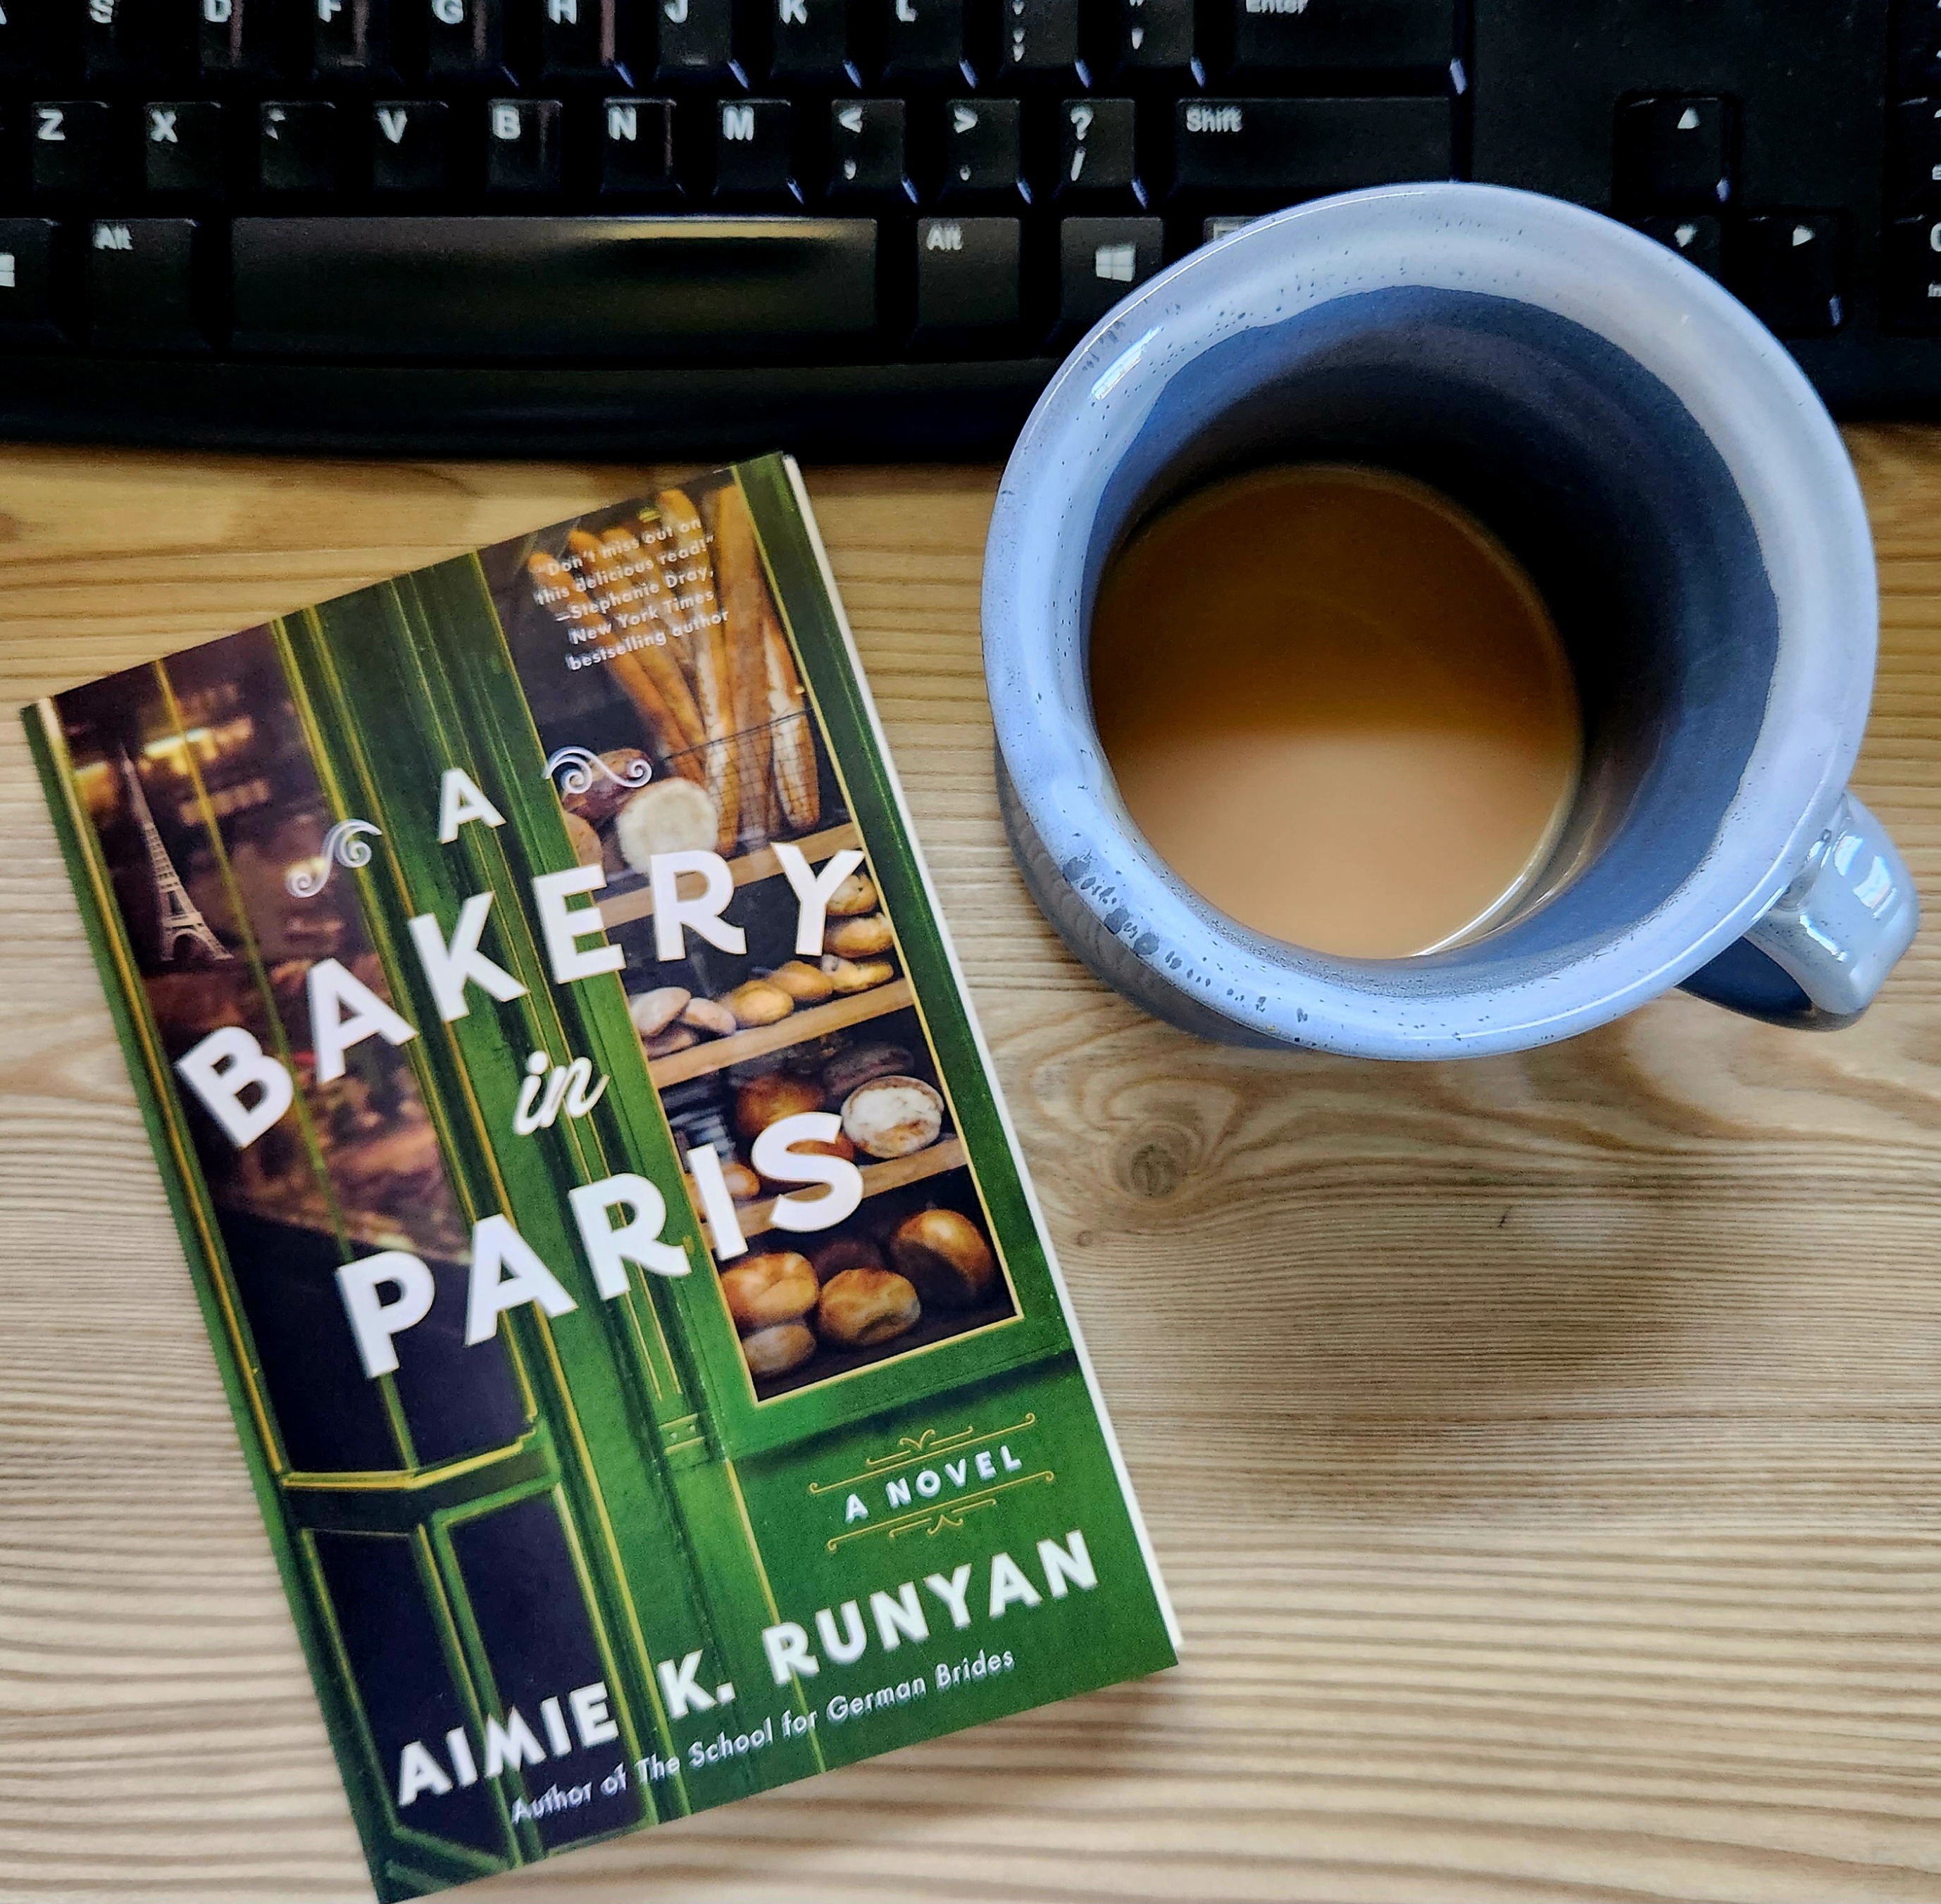 a bakery in paris by aimie k. runyan, book cover and mug of tea